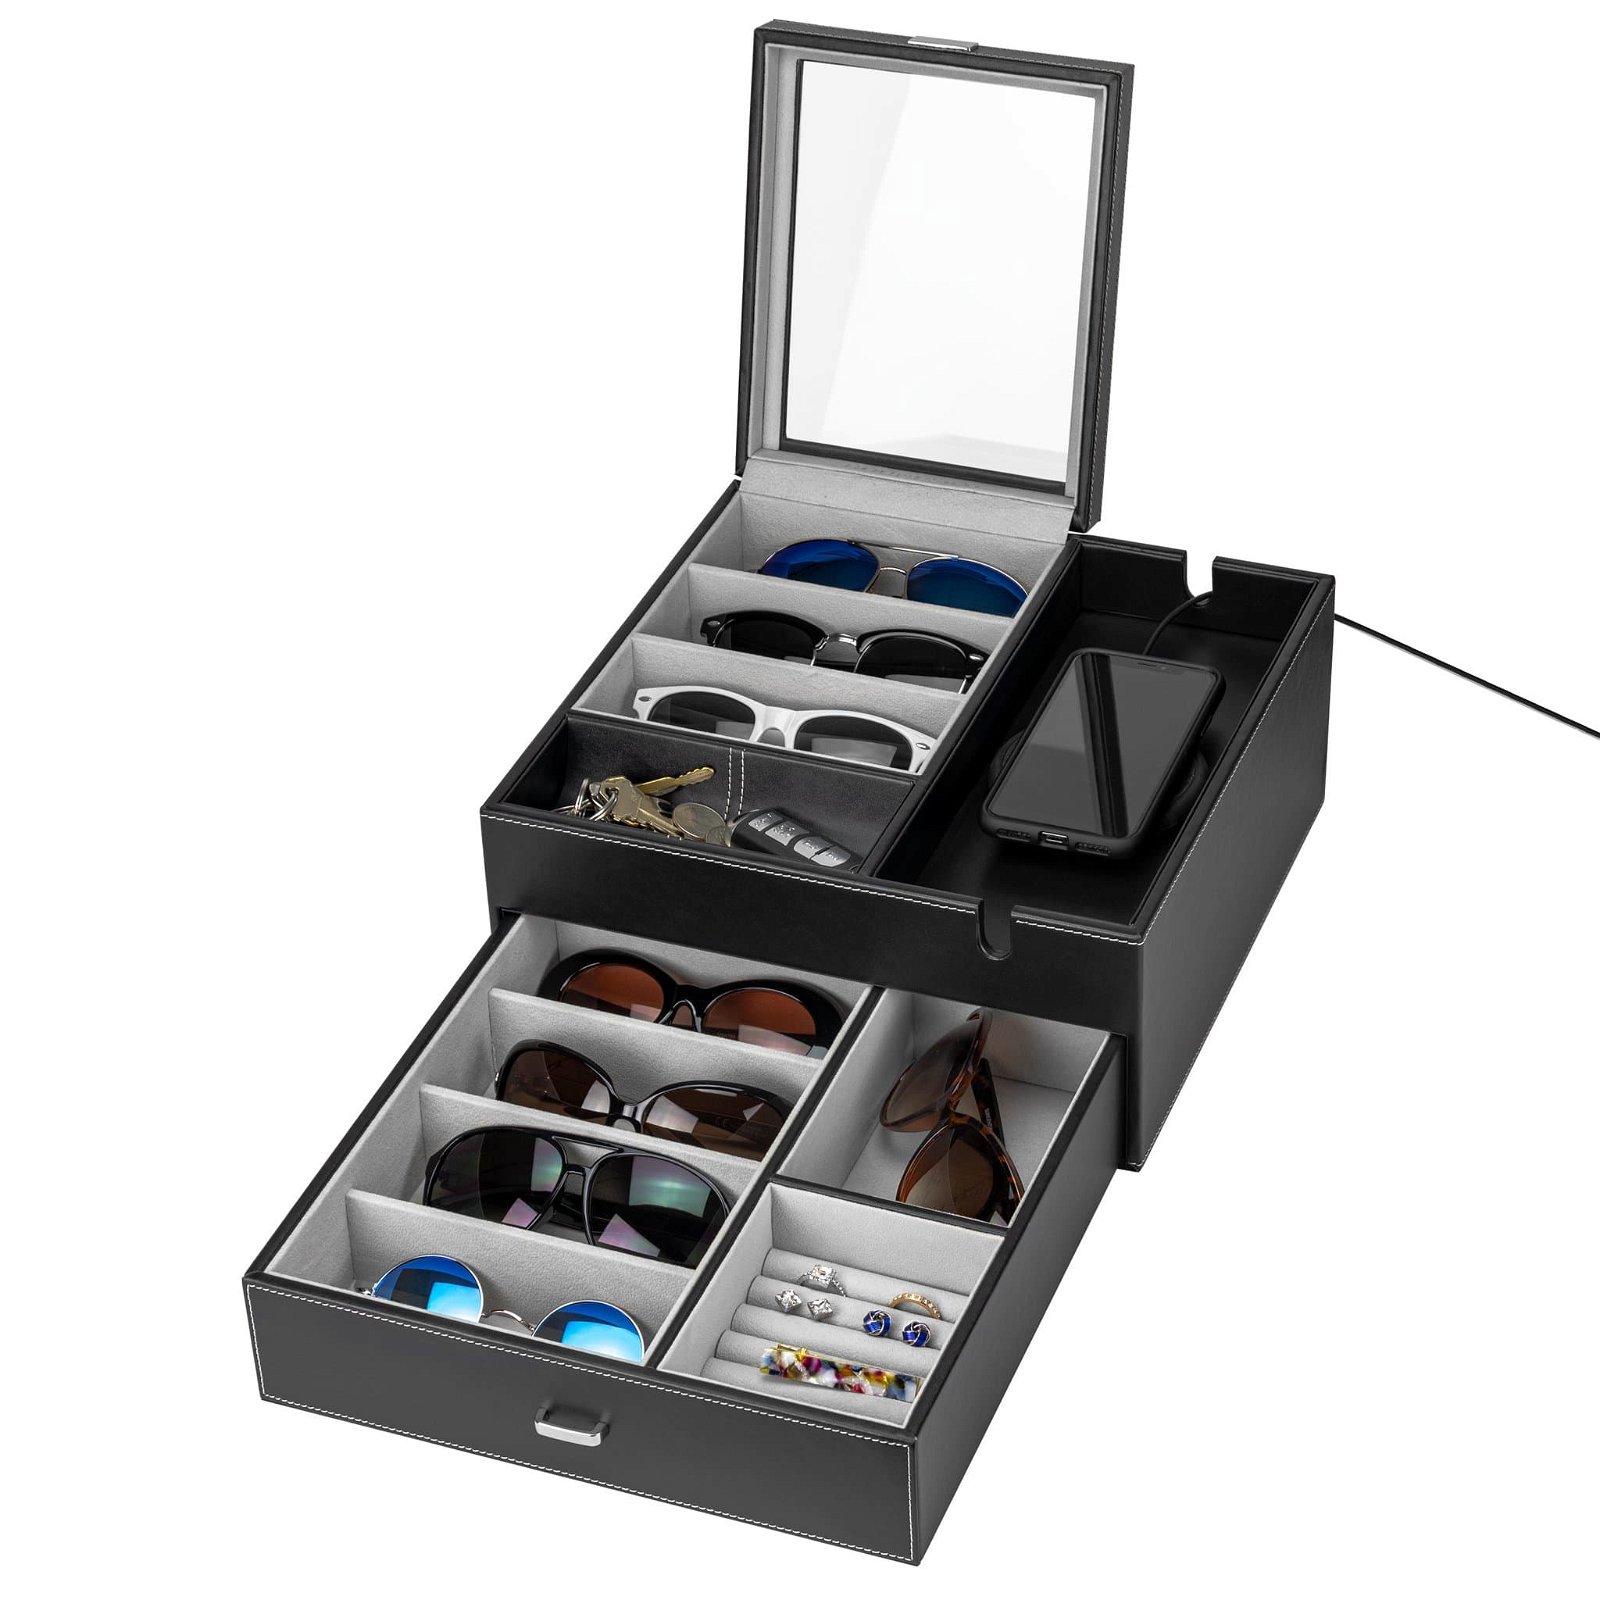 Image of Lookout - Sunglasses Organizer Valet Box, Accessory Drawer